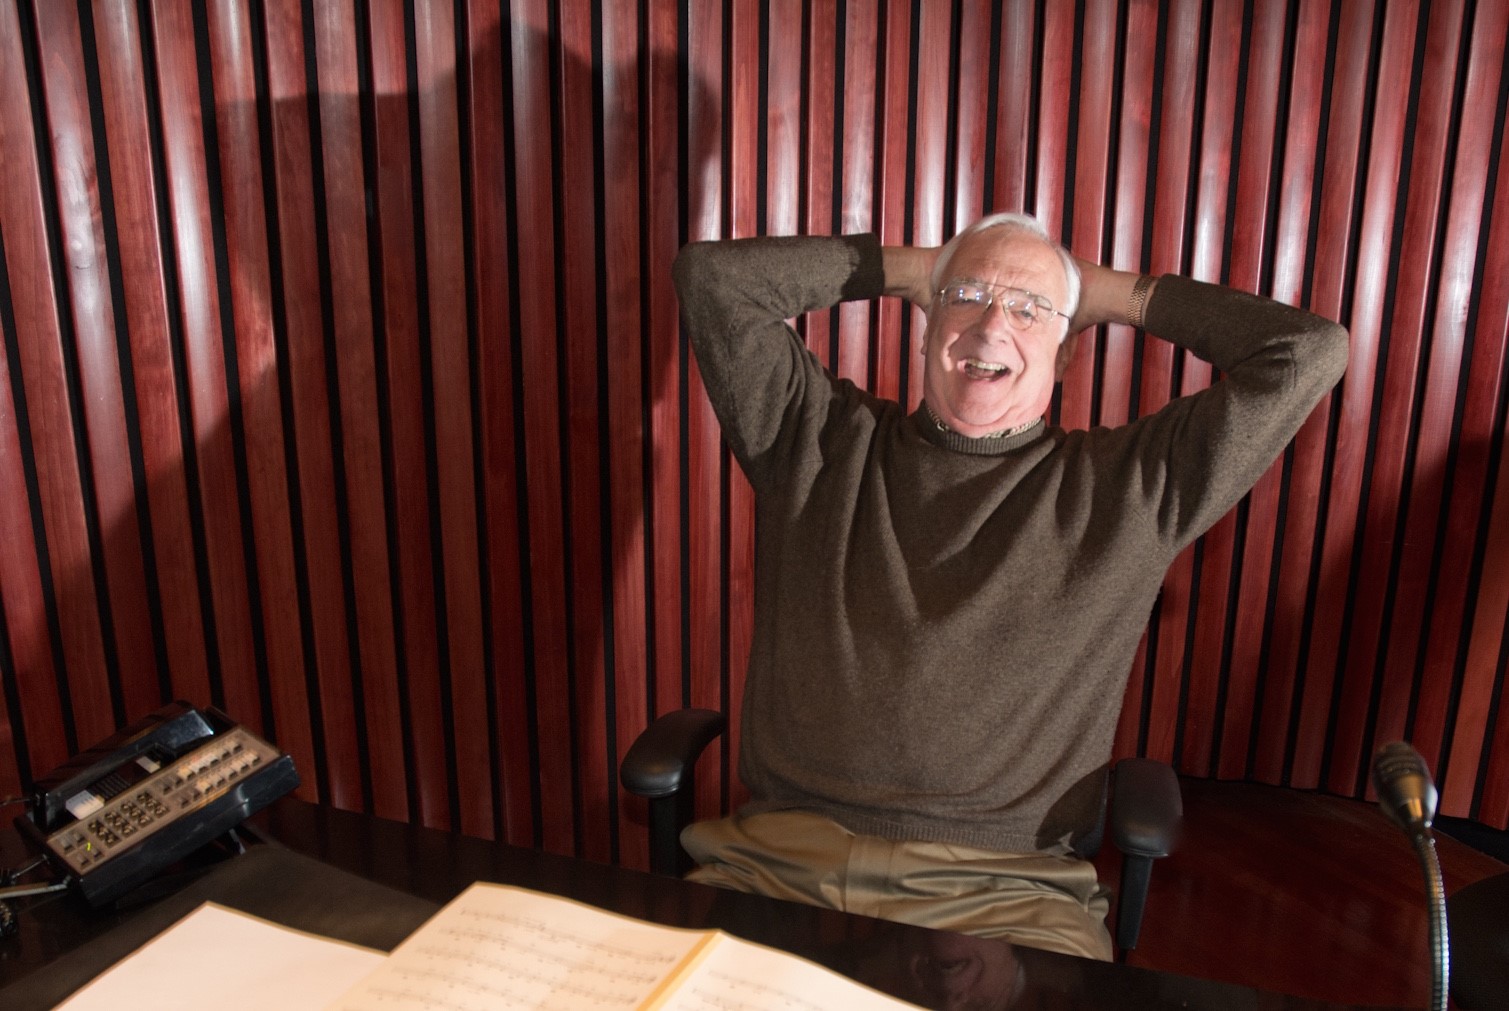 smiling man in recording studio leaning back in chair